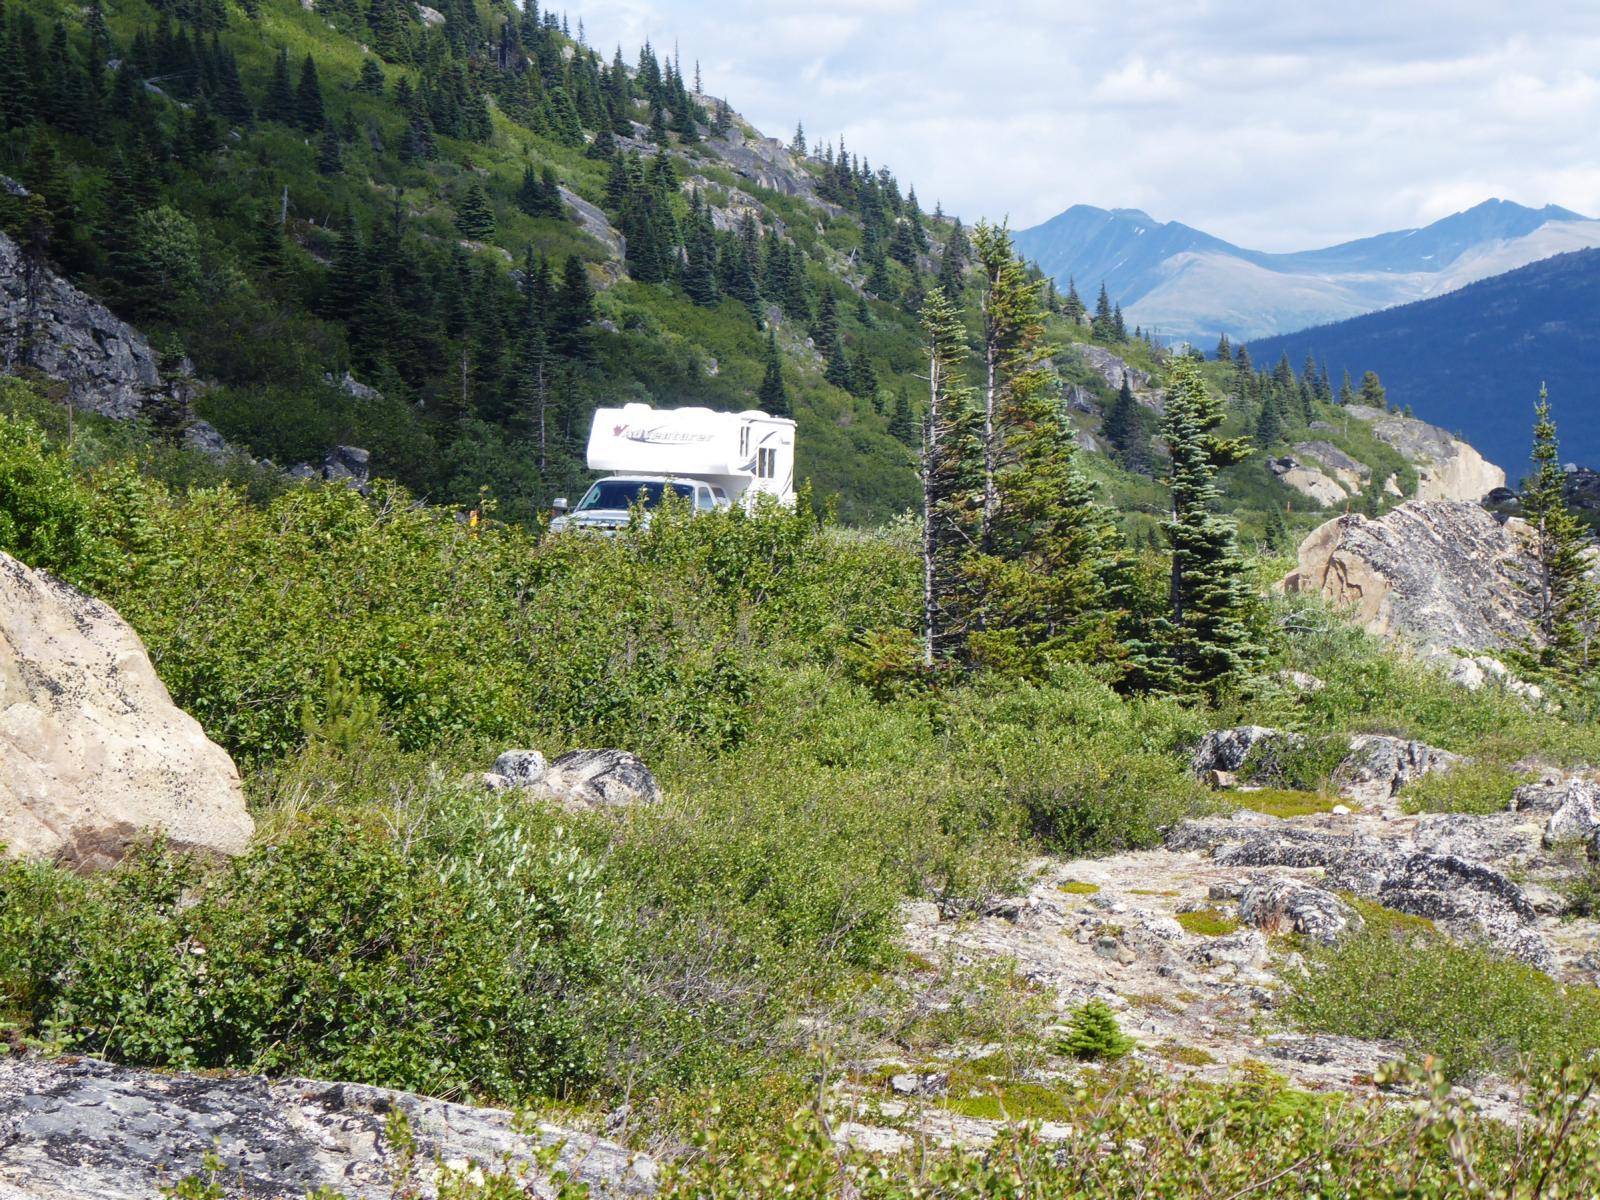 A campervan driving on a road through a wild and mountaineous path